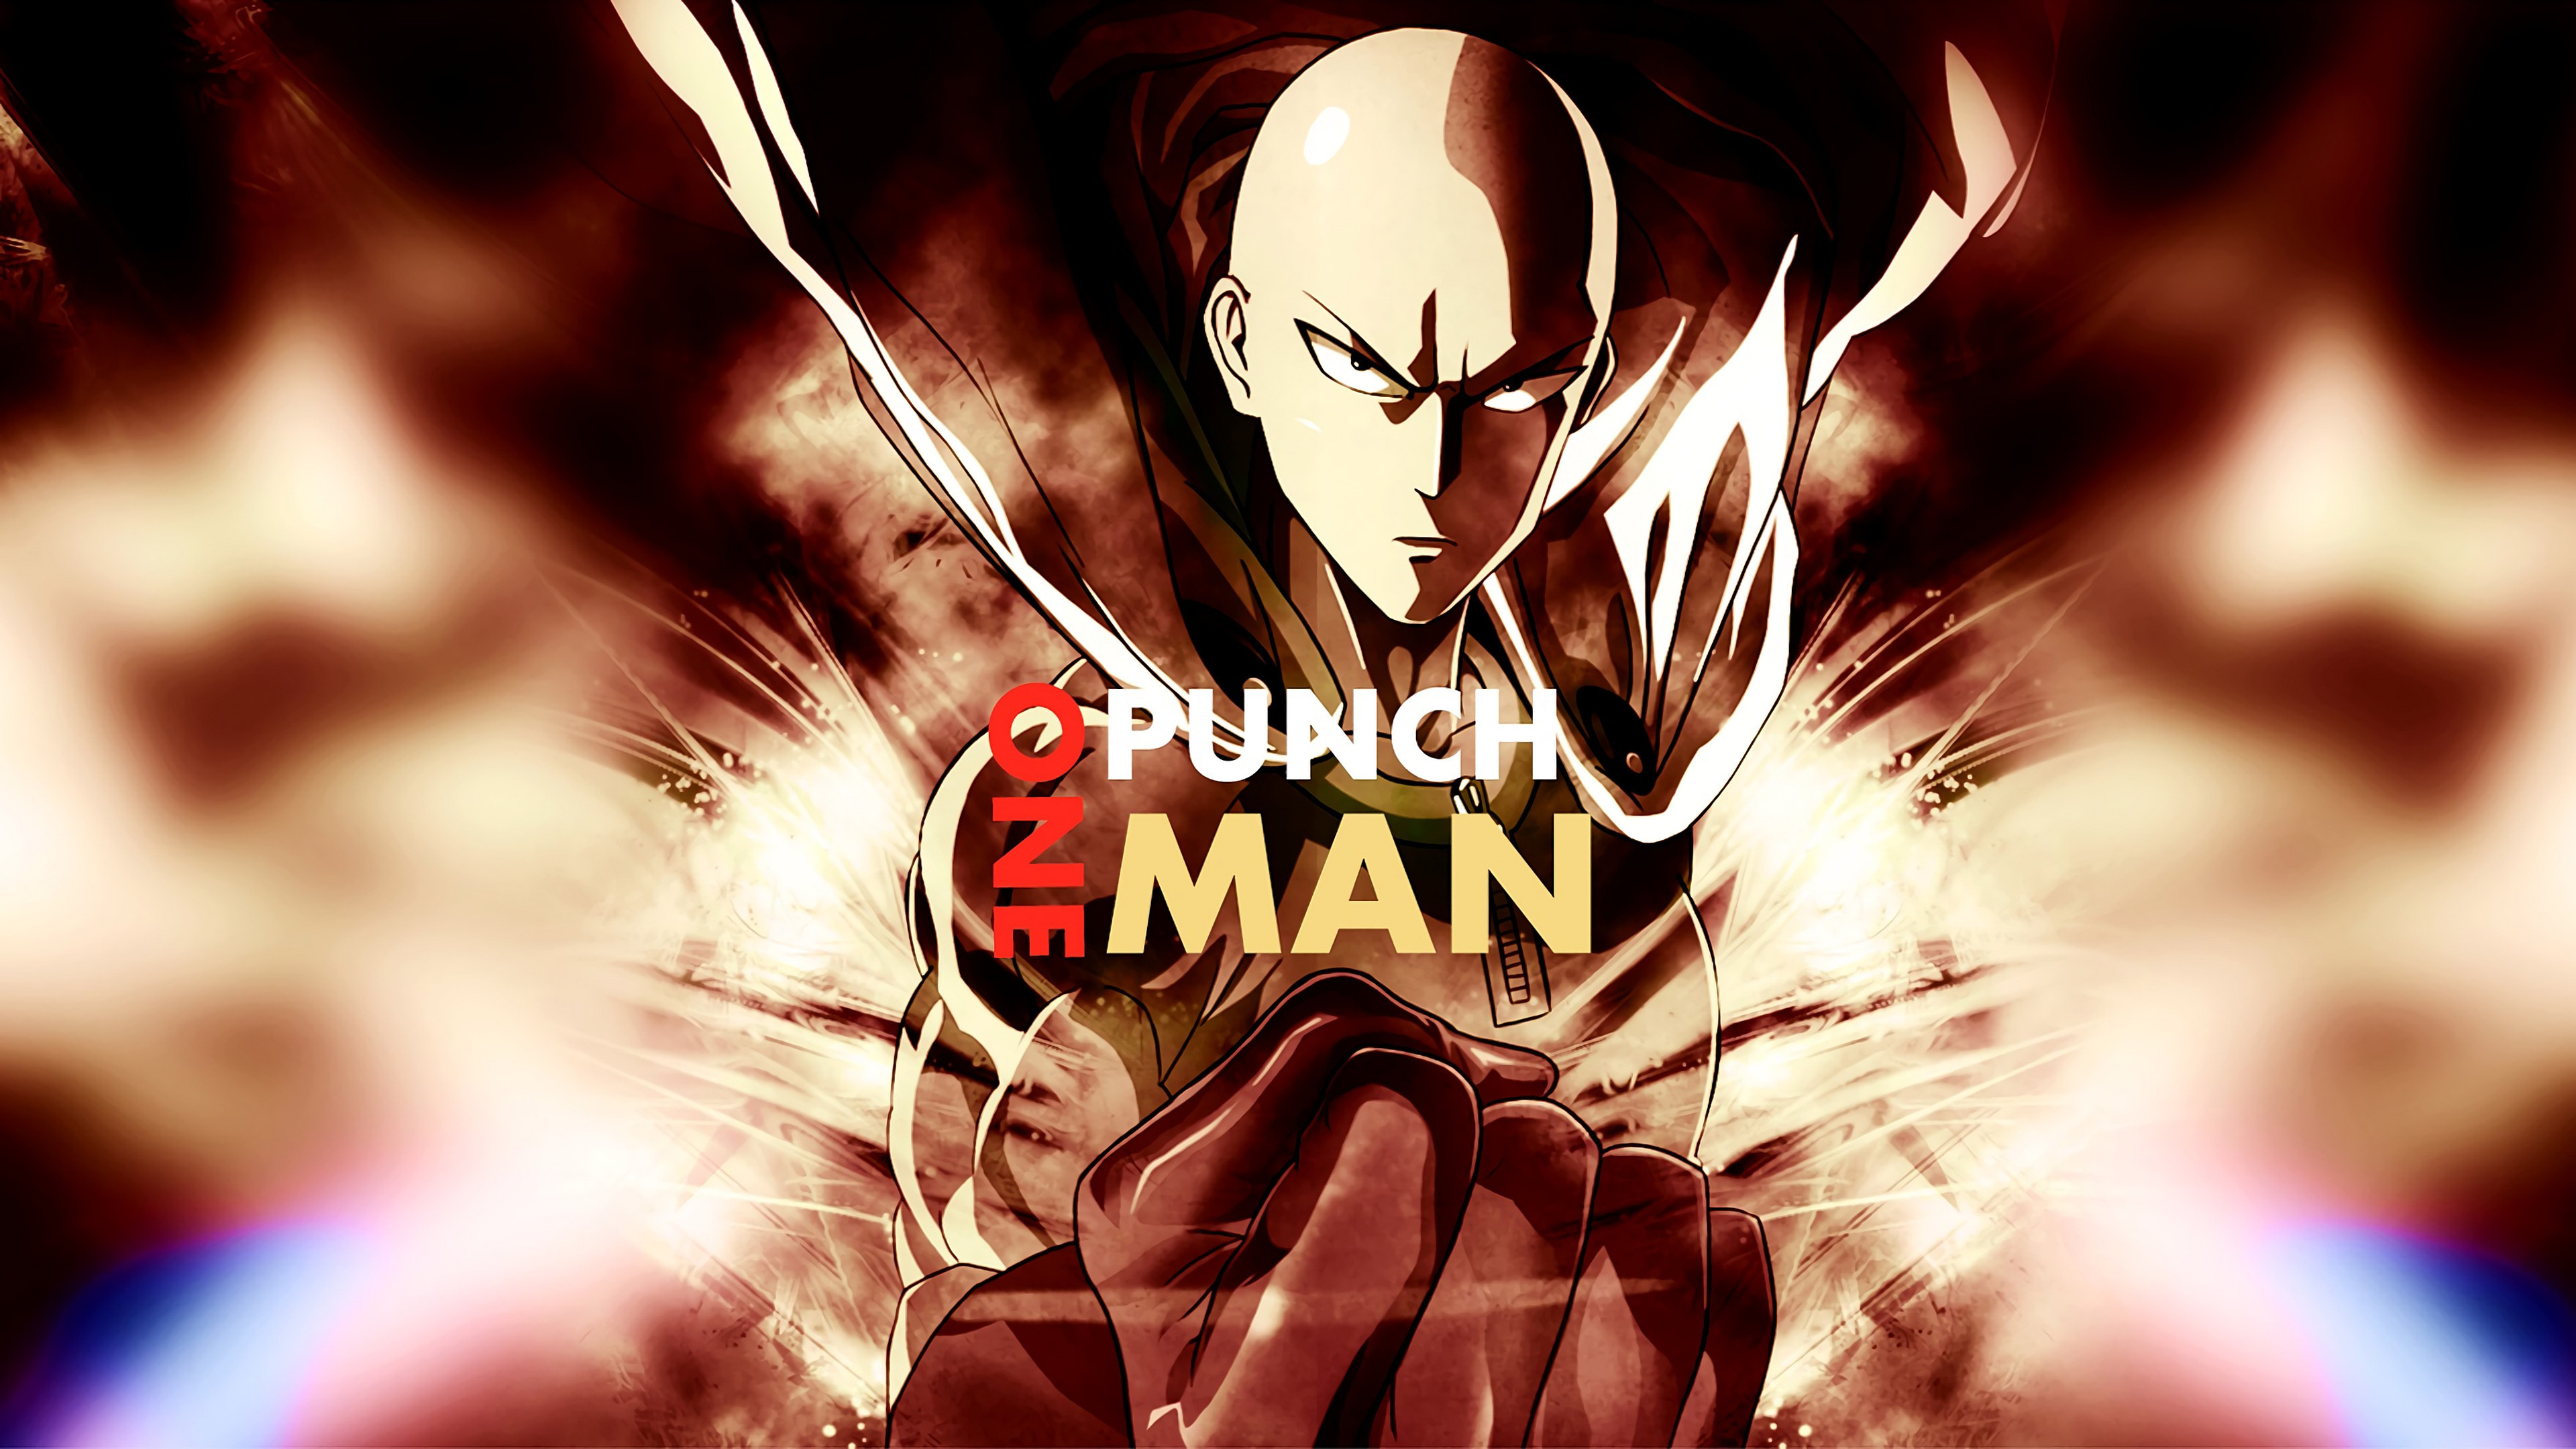 One Punch Man Season 3 Release Date Leaked Anime Series Will Premiere In Q4